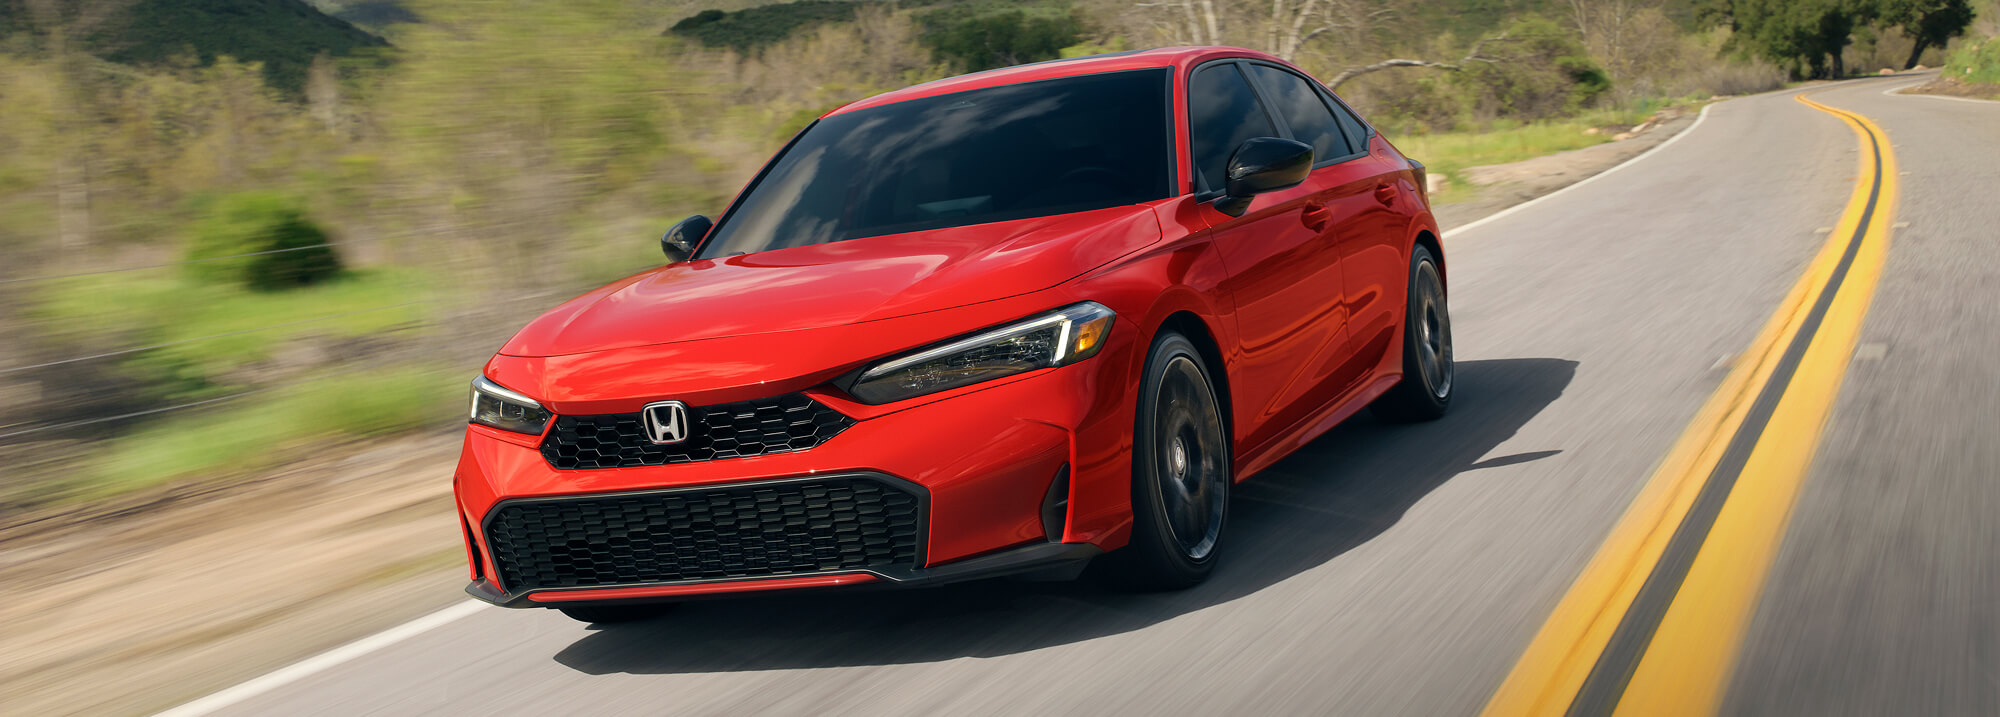 Honda Civic treated to refreshed design, modern tech and expanded drivetrain options video-banner